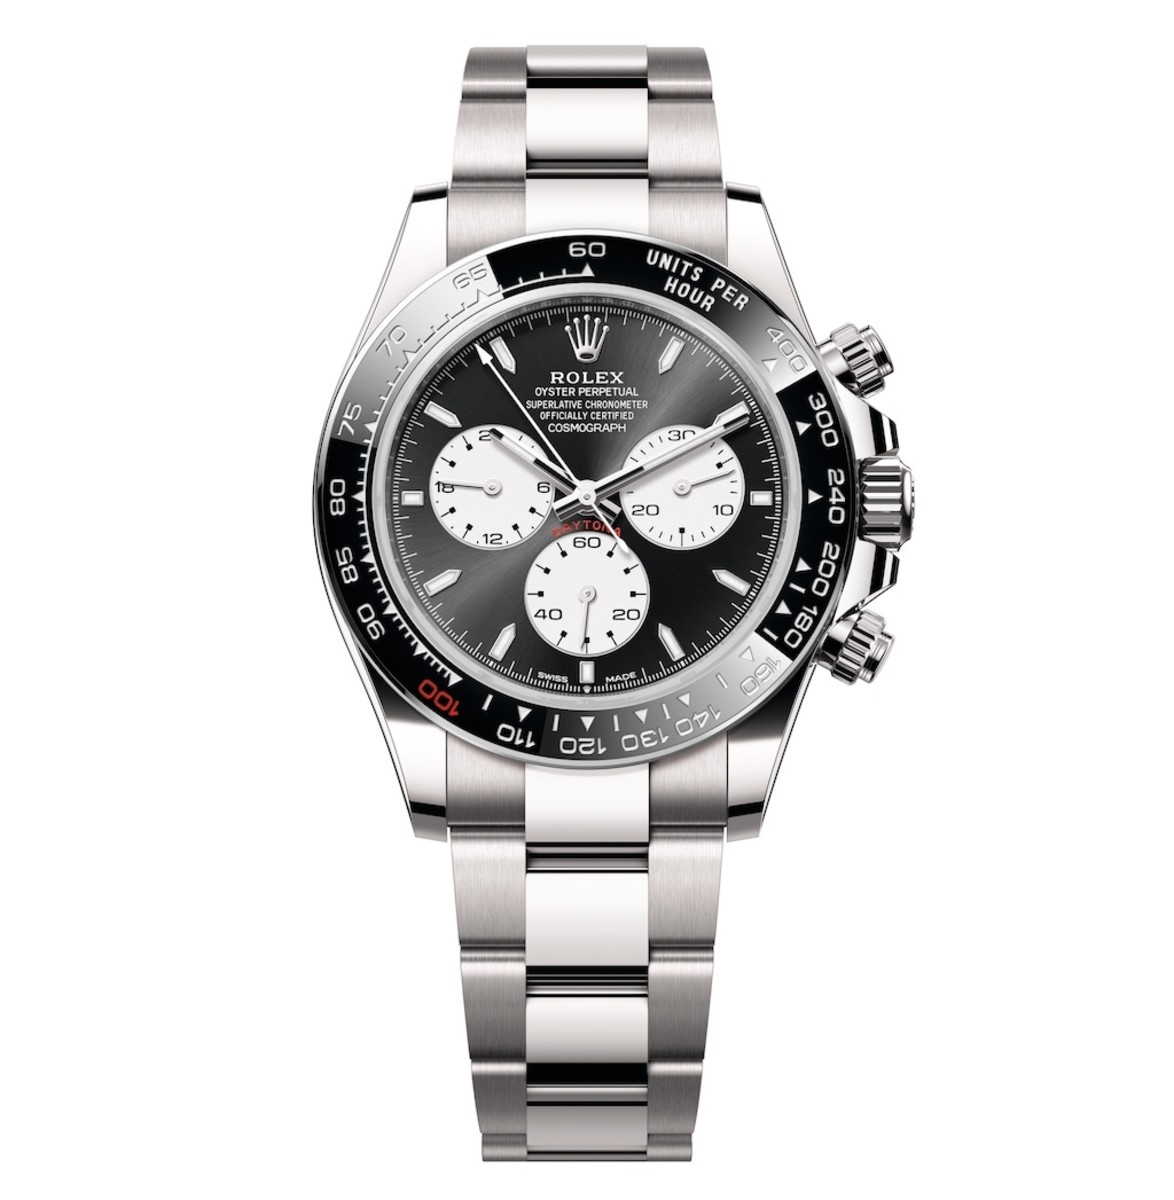 Rolex celebrates 100 years of Le Mans with a special edition Cosmograph ...